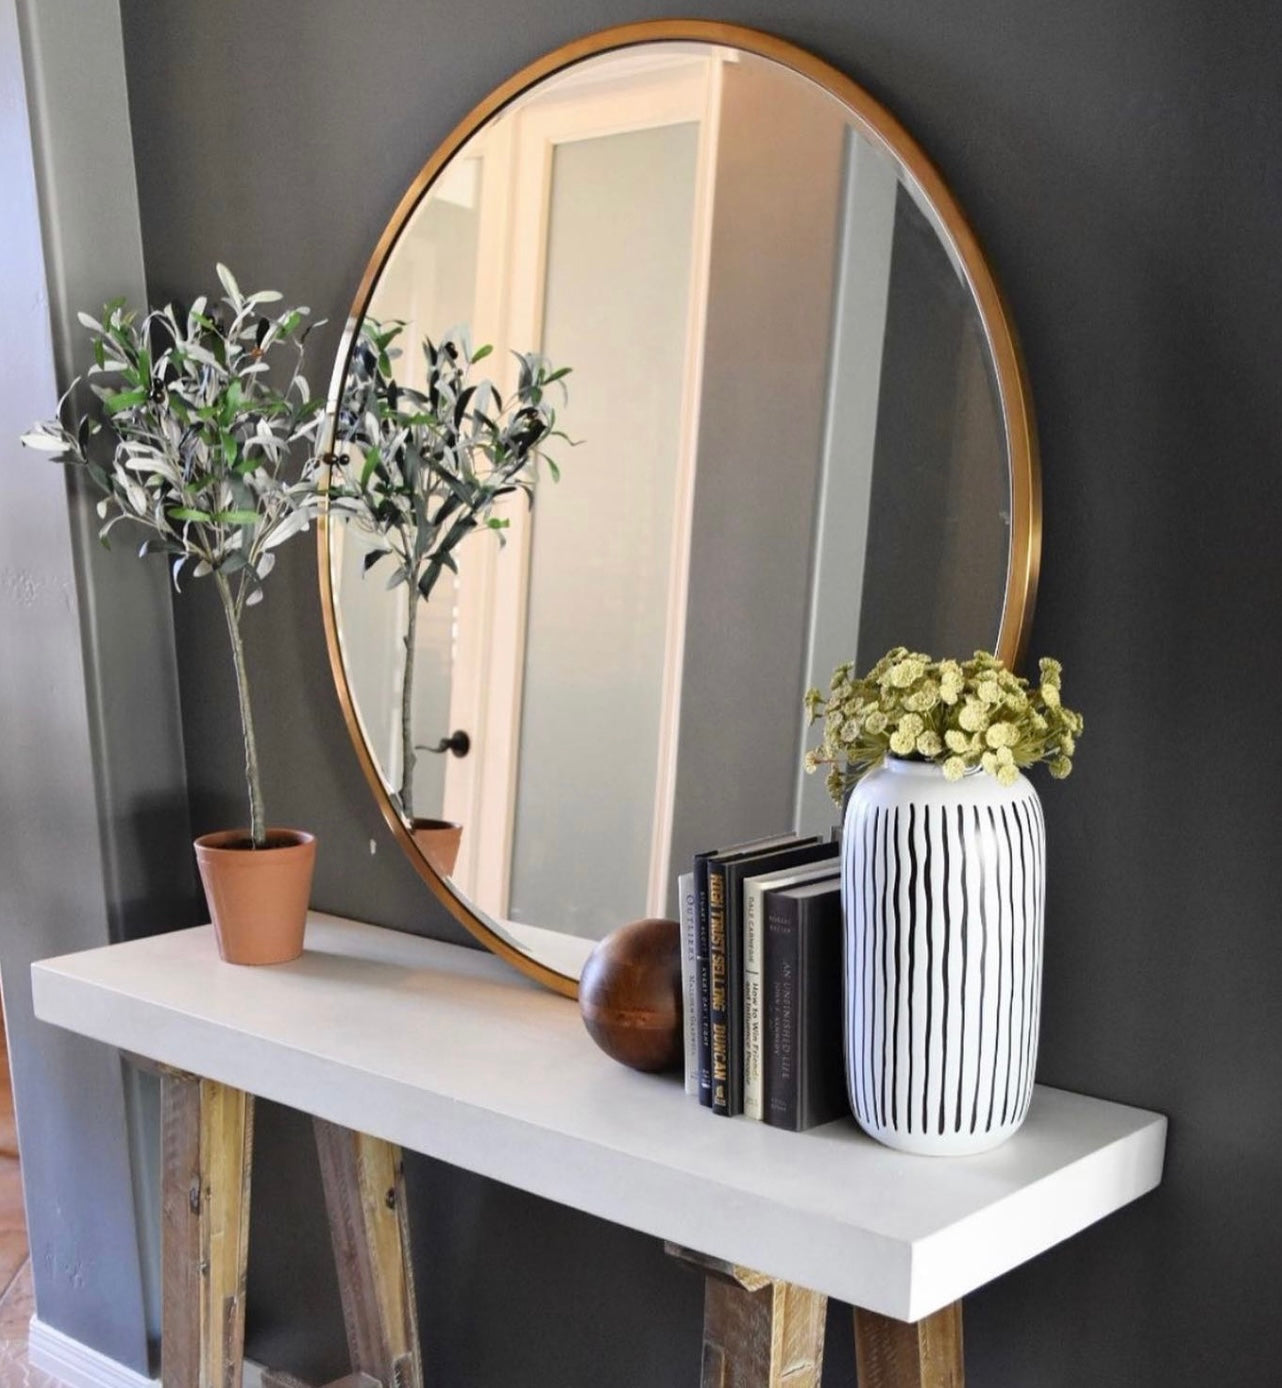 3 Steps to Enhance Your Functional and Stylish Entryway for an Intentional First Impression